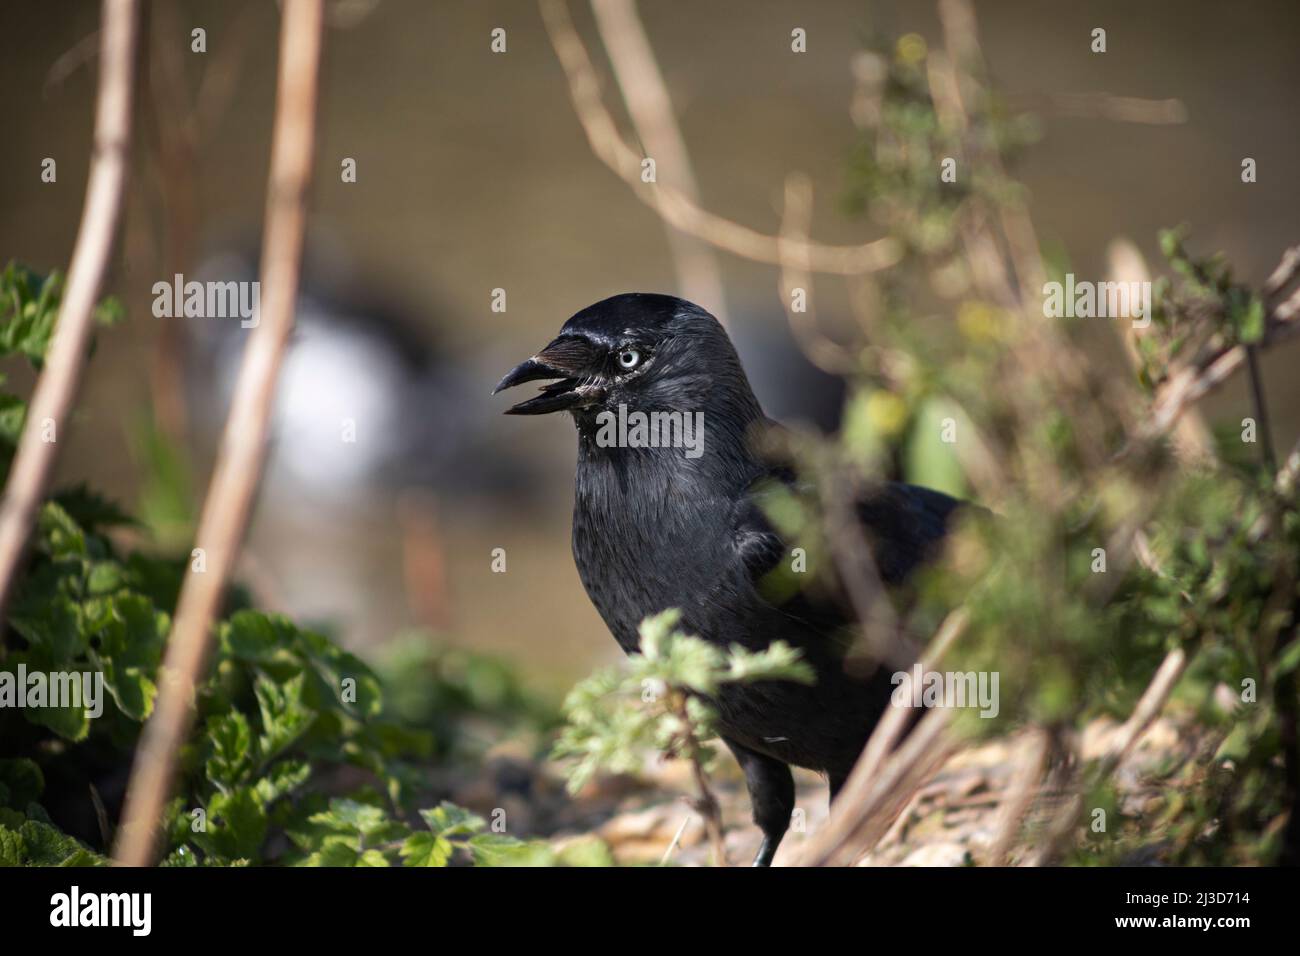 Close up of a Jackdaw bird with its beak open showing its tongue Stock Photo